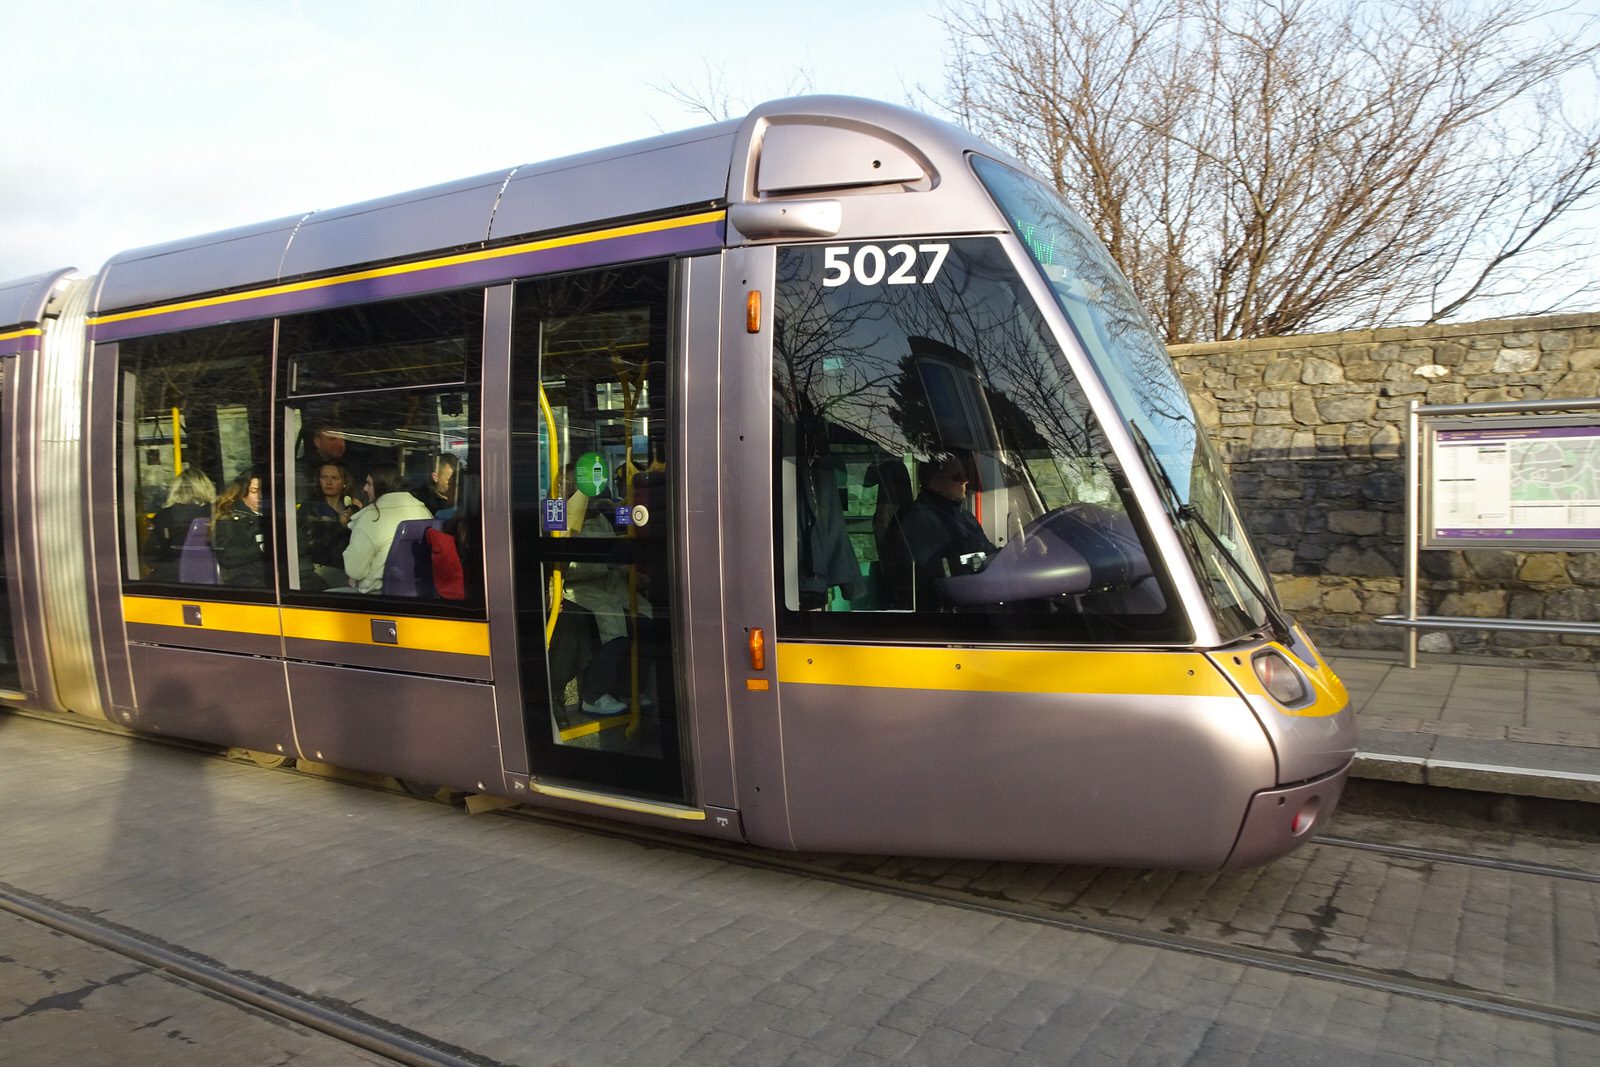 THE MILLTOWN LUAS TRAM STOP A FEW DAYS BEFORE CHRISTMAS DAY [AND NEARBY]-226265-1